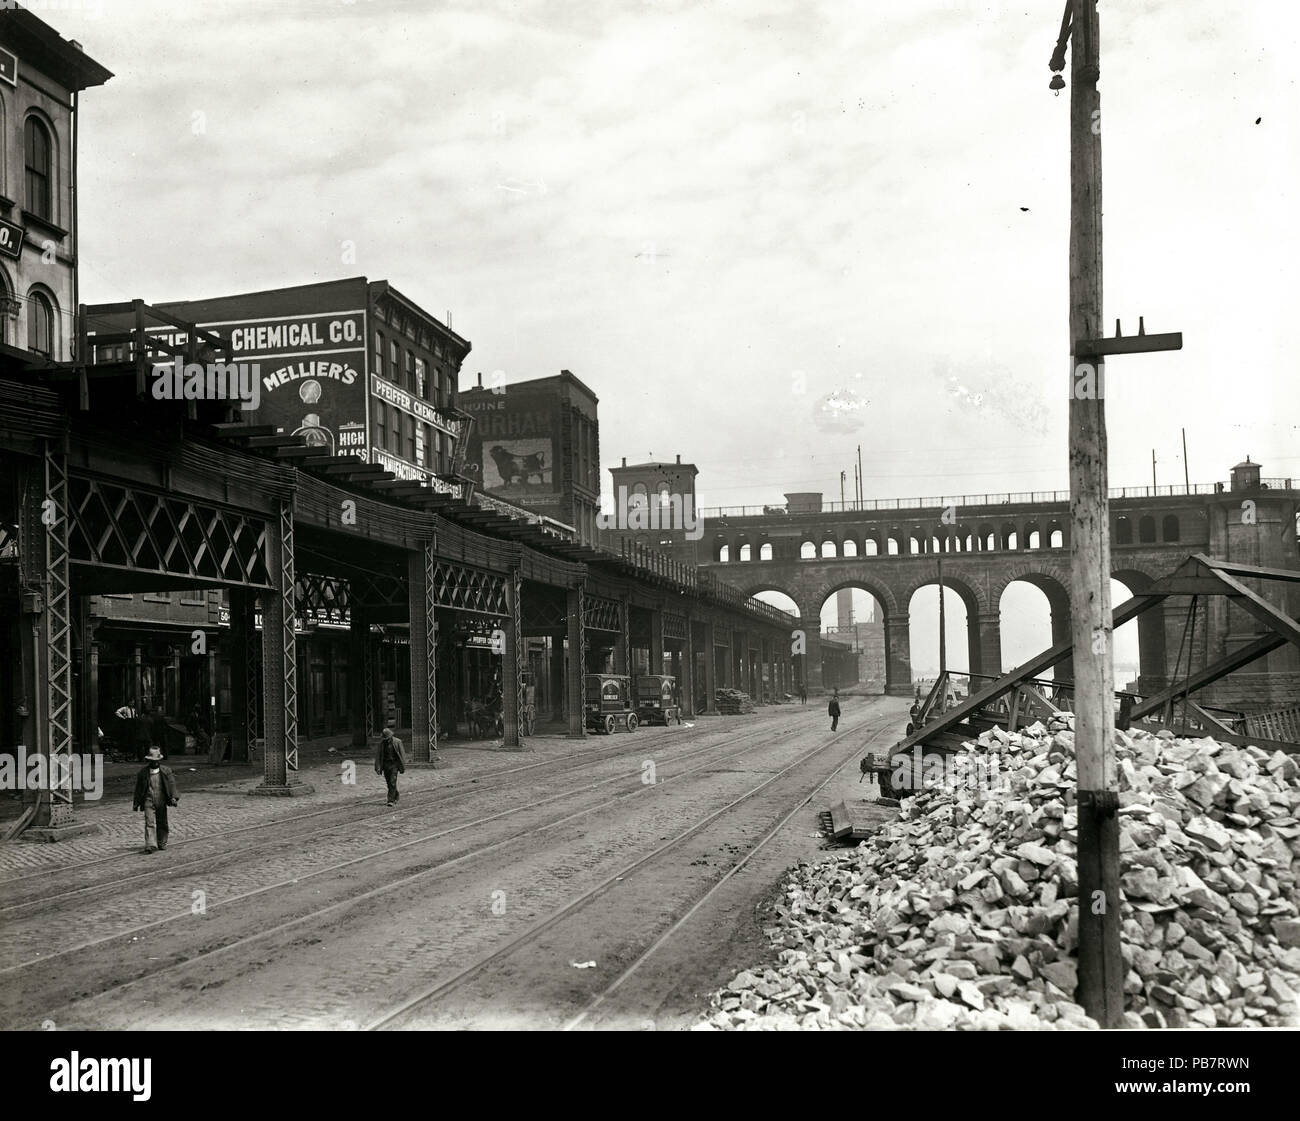 1845 Wharf Street nach Norden in Richtung Pfeiffer Chemical Company in 500 North Commercial Street. Eads Bridge in der Ferne Stockfoto